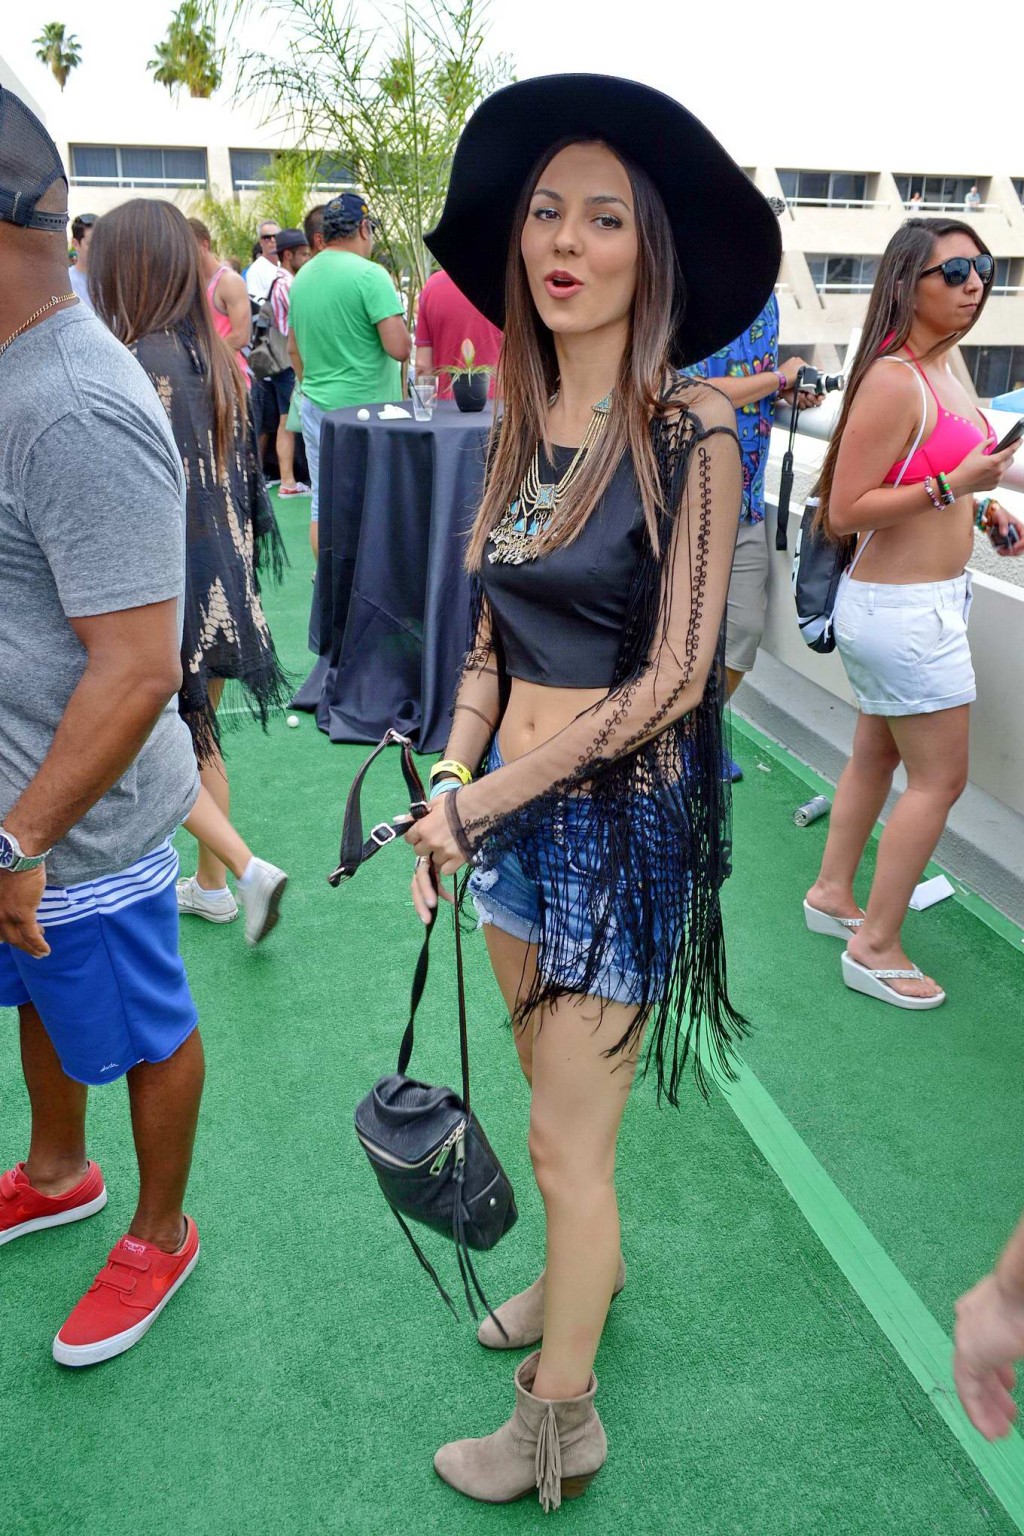 Victoria Justice wearing denim shorts and belly top at the Hard Rock Hotel Pool  #75198969